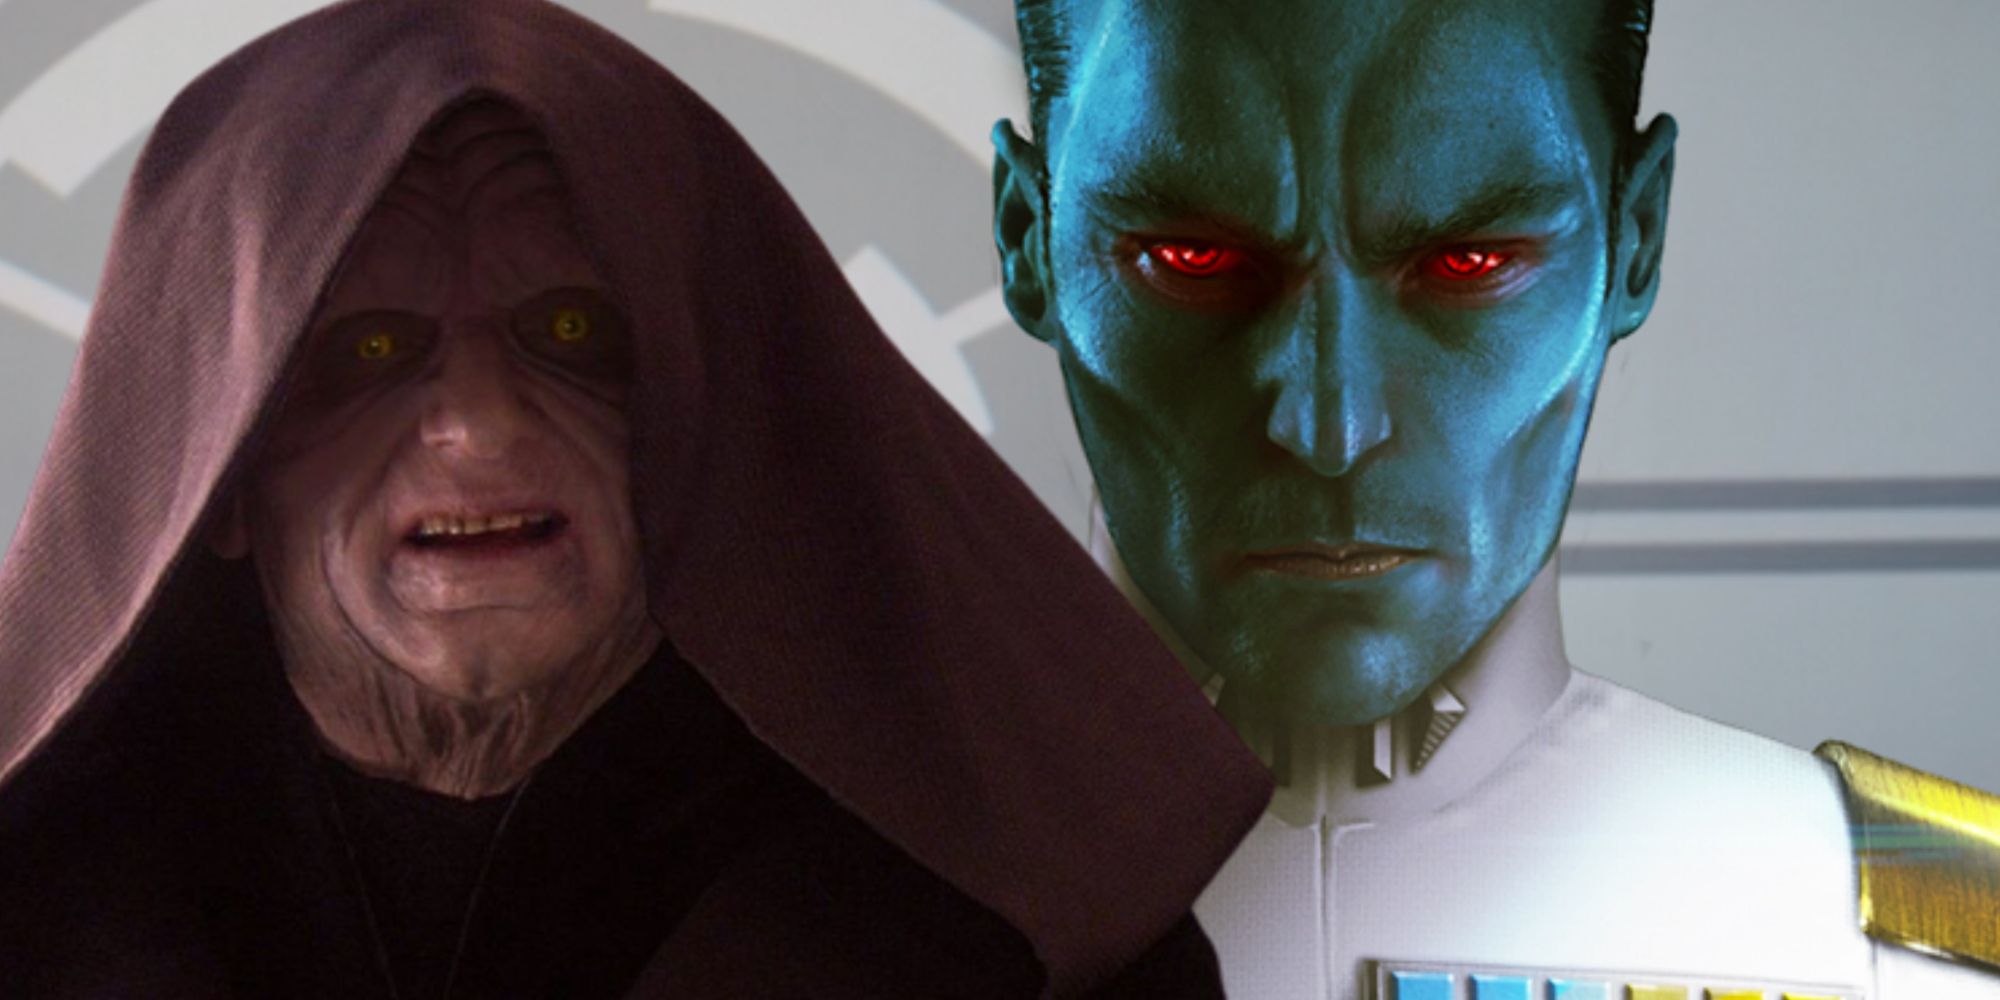 Emperor Palpatine and Grand Admiral Thrawn from Star Wars.